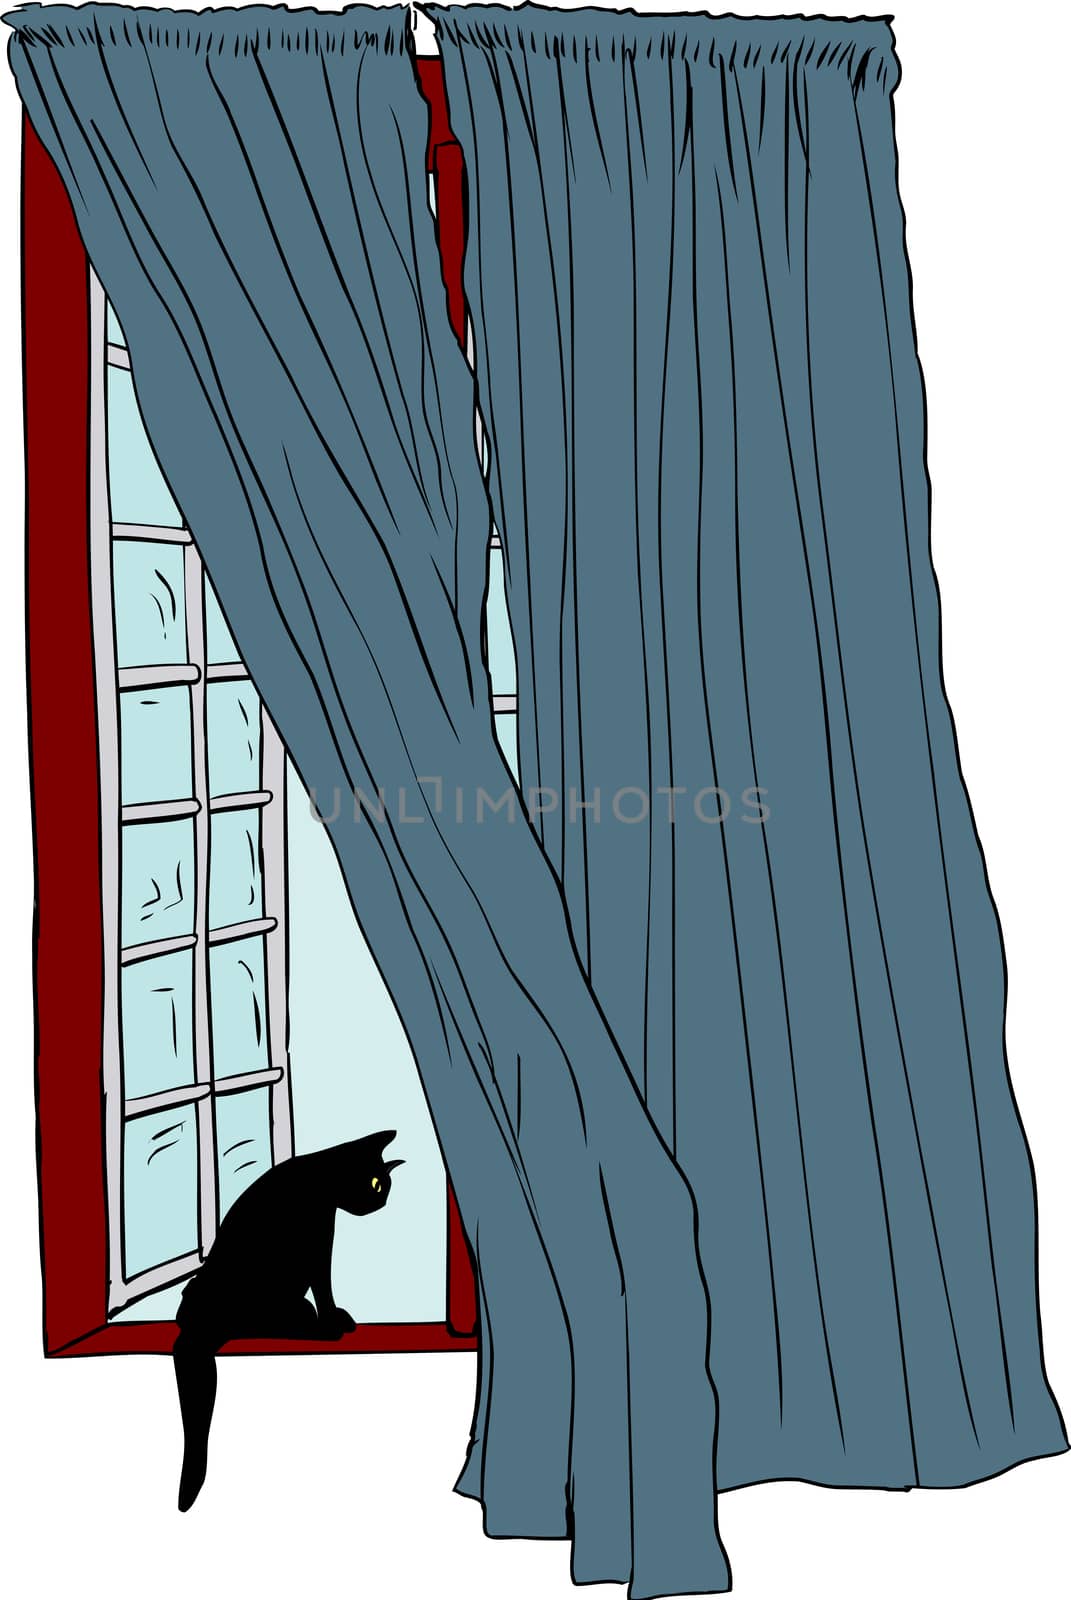 Isolated hand drawn illustration of open casement window and cat looking over